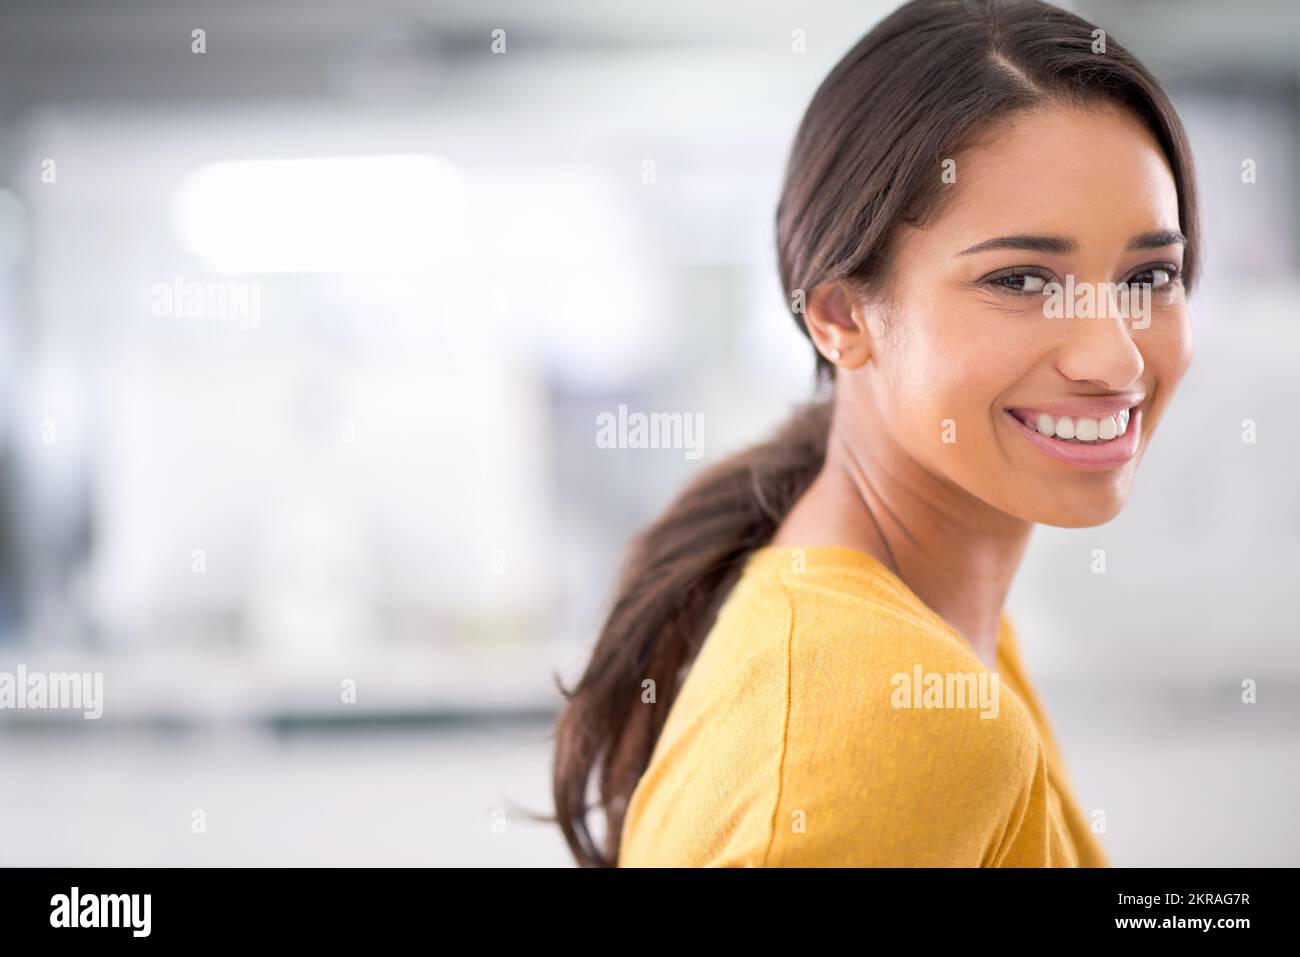 Shes got the right attitude. Cropped portrait of an attractive young businesswoman in the office. Stock Photo